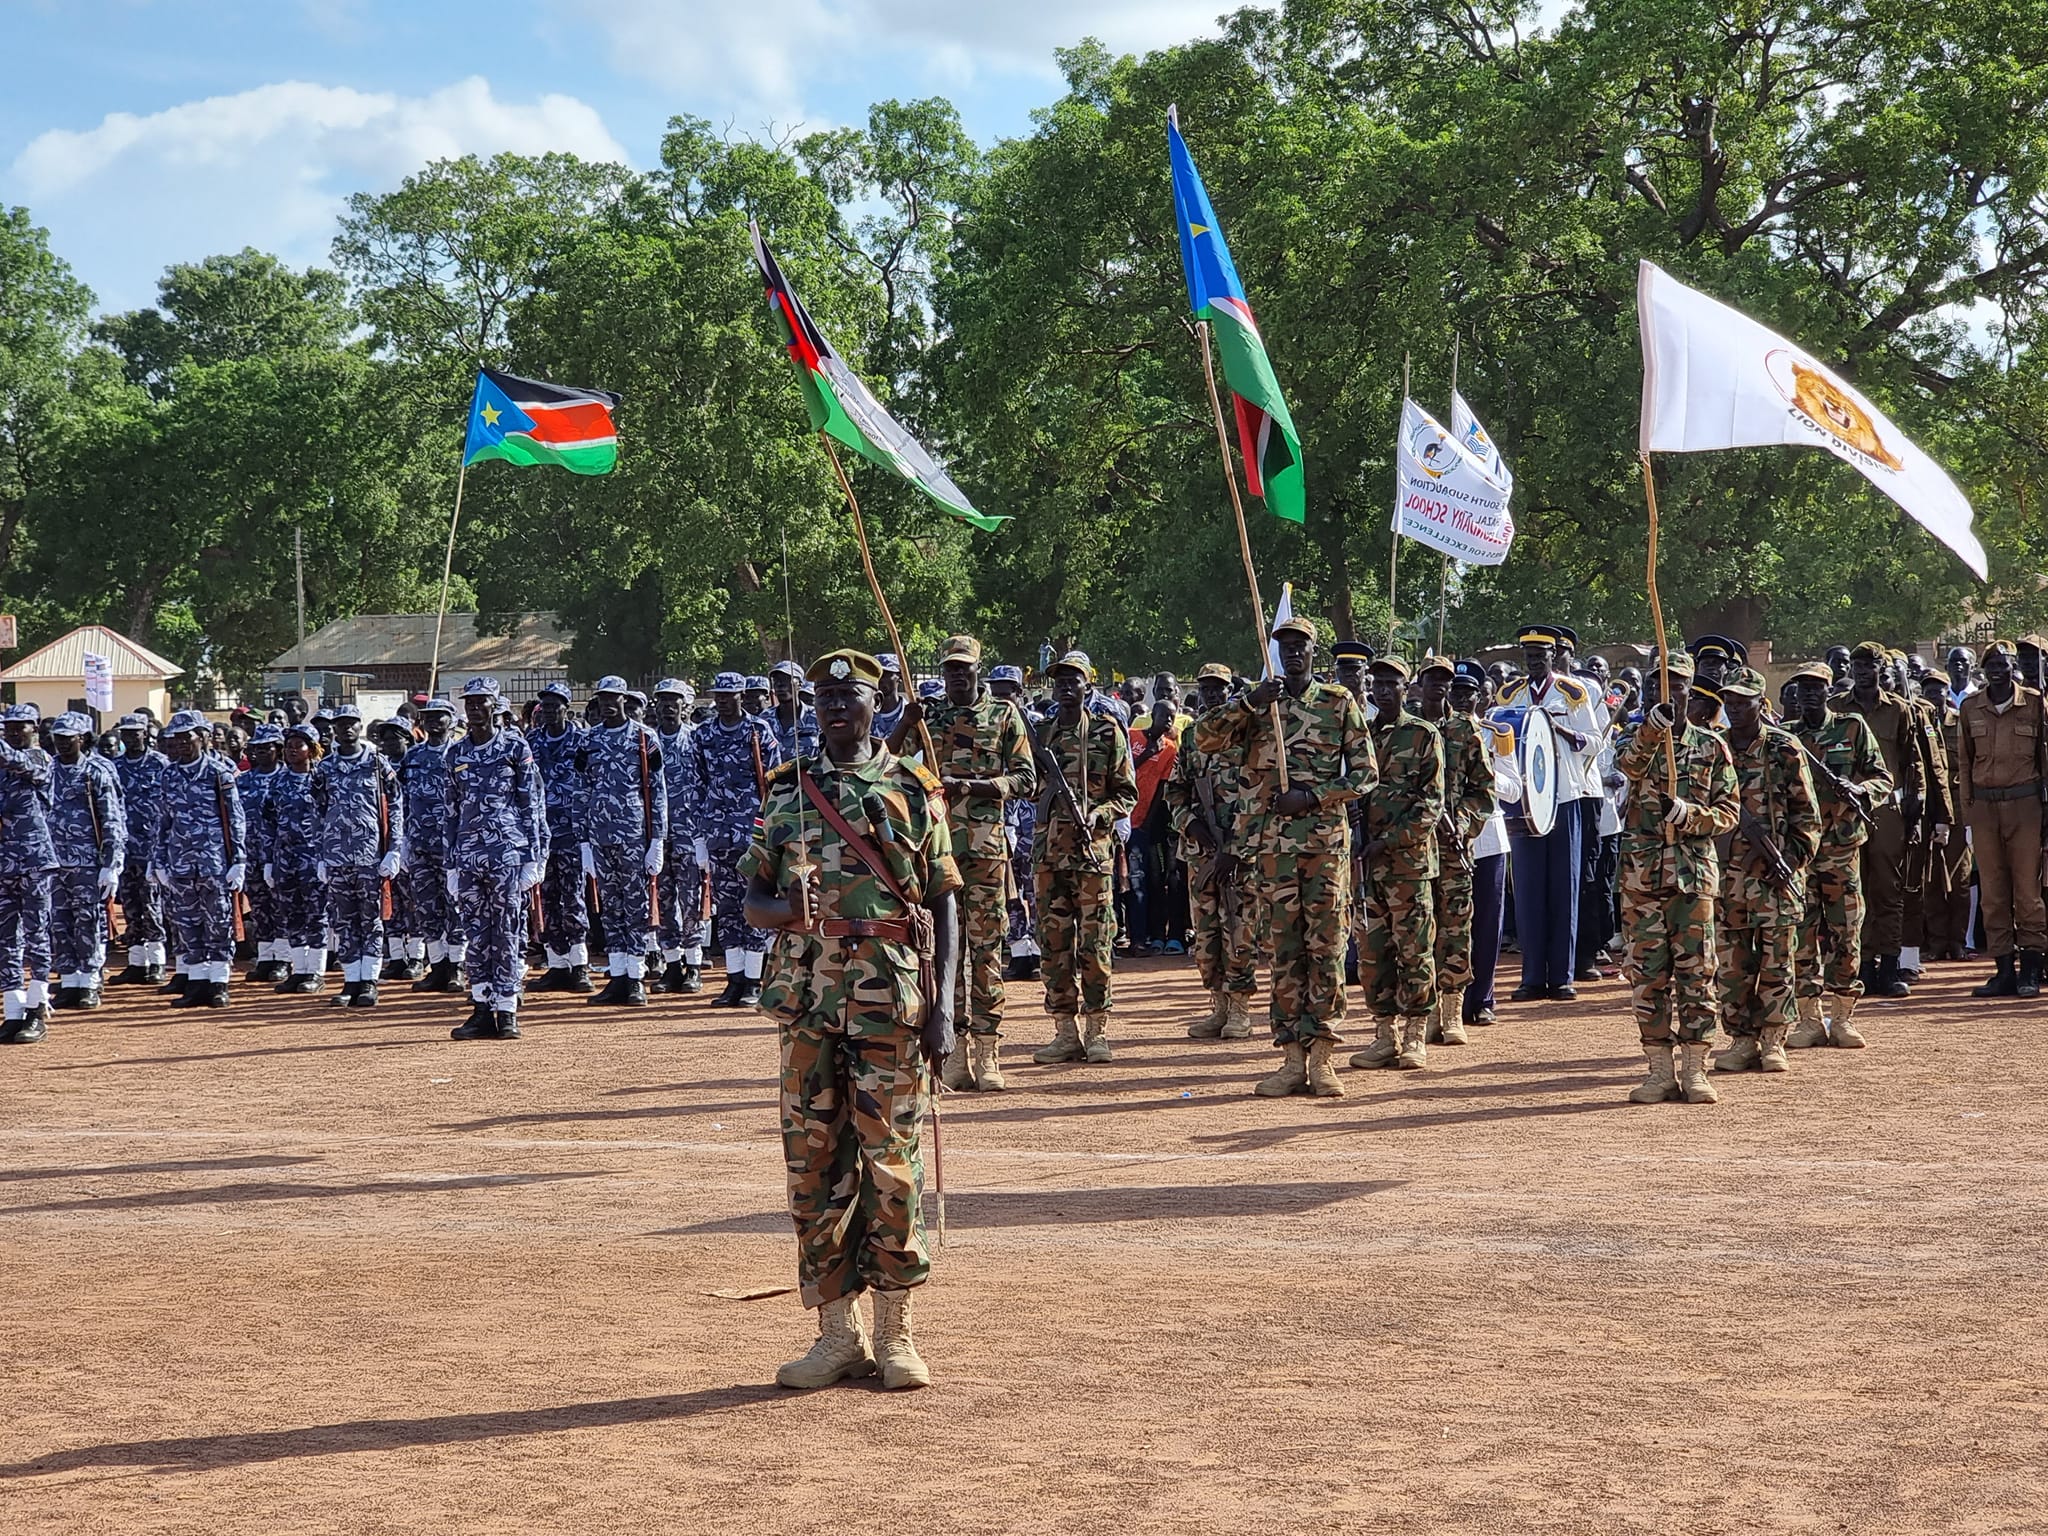 Jubilation in some states as Juba marks Independence Day in silence